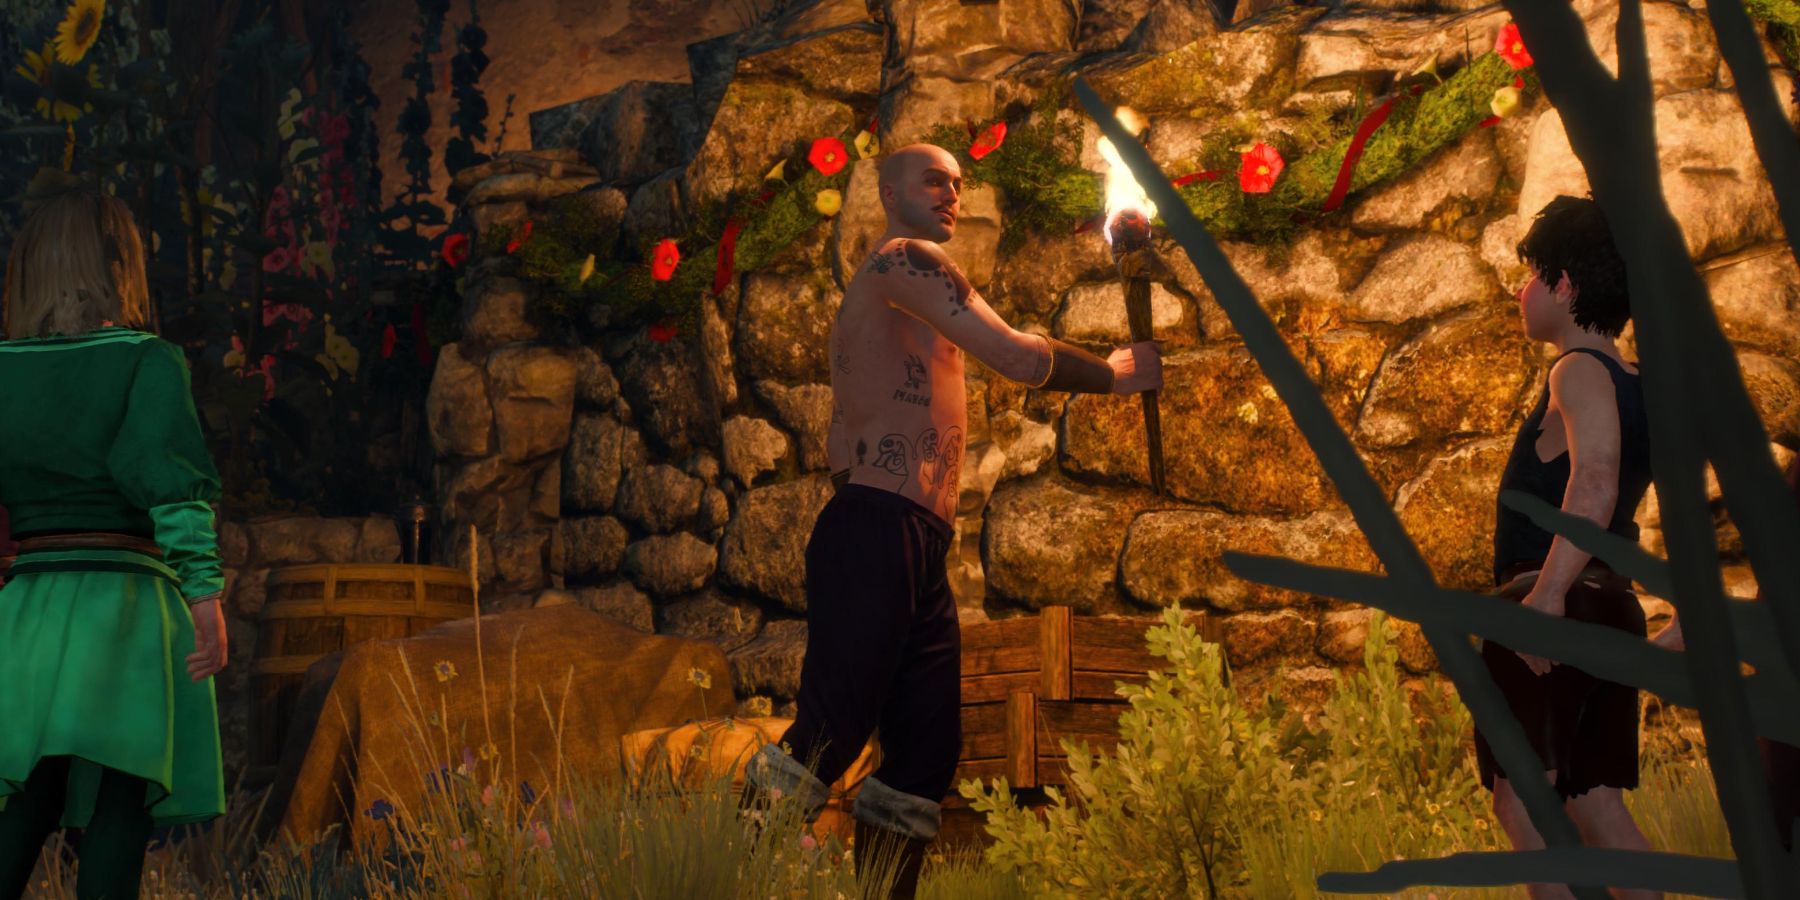 Witcher 3 - the fire eater entertaining at the wedding